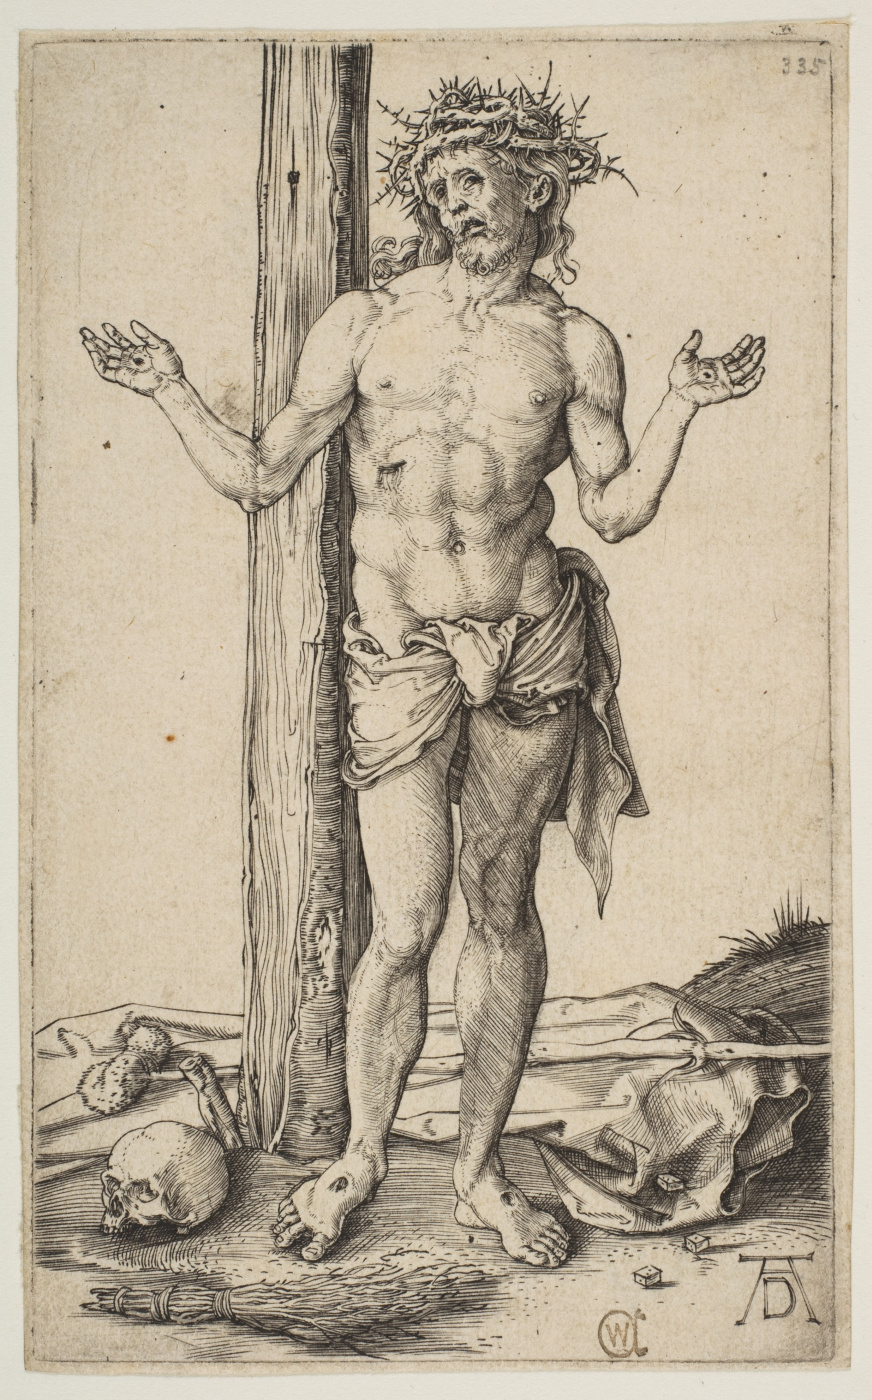 Albrecht Dürer. The man of sorrows with arms outstretched